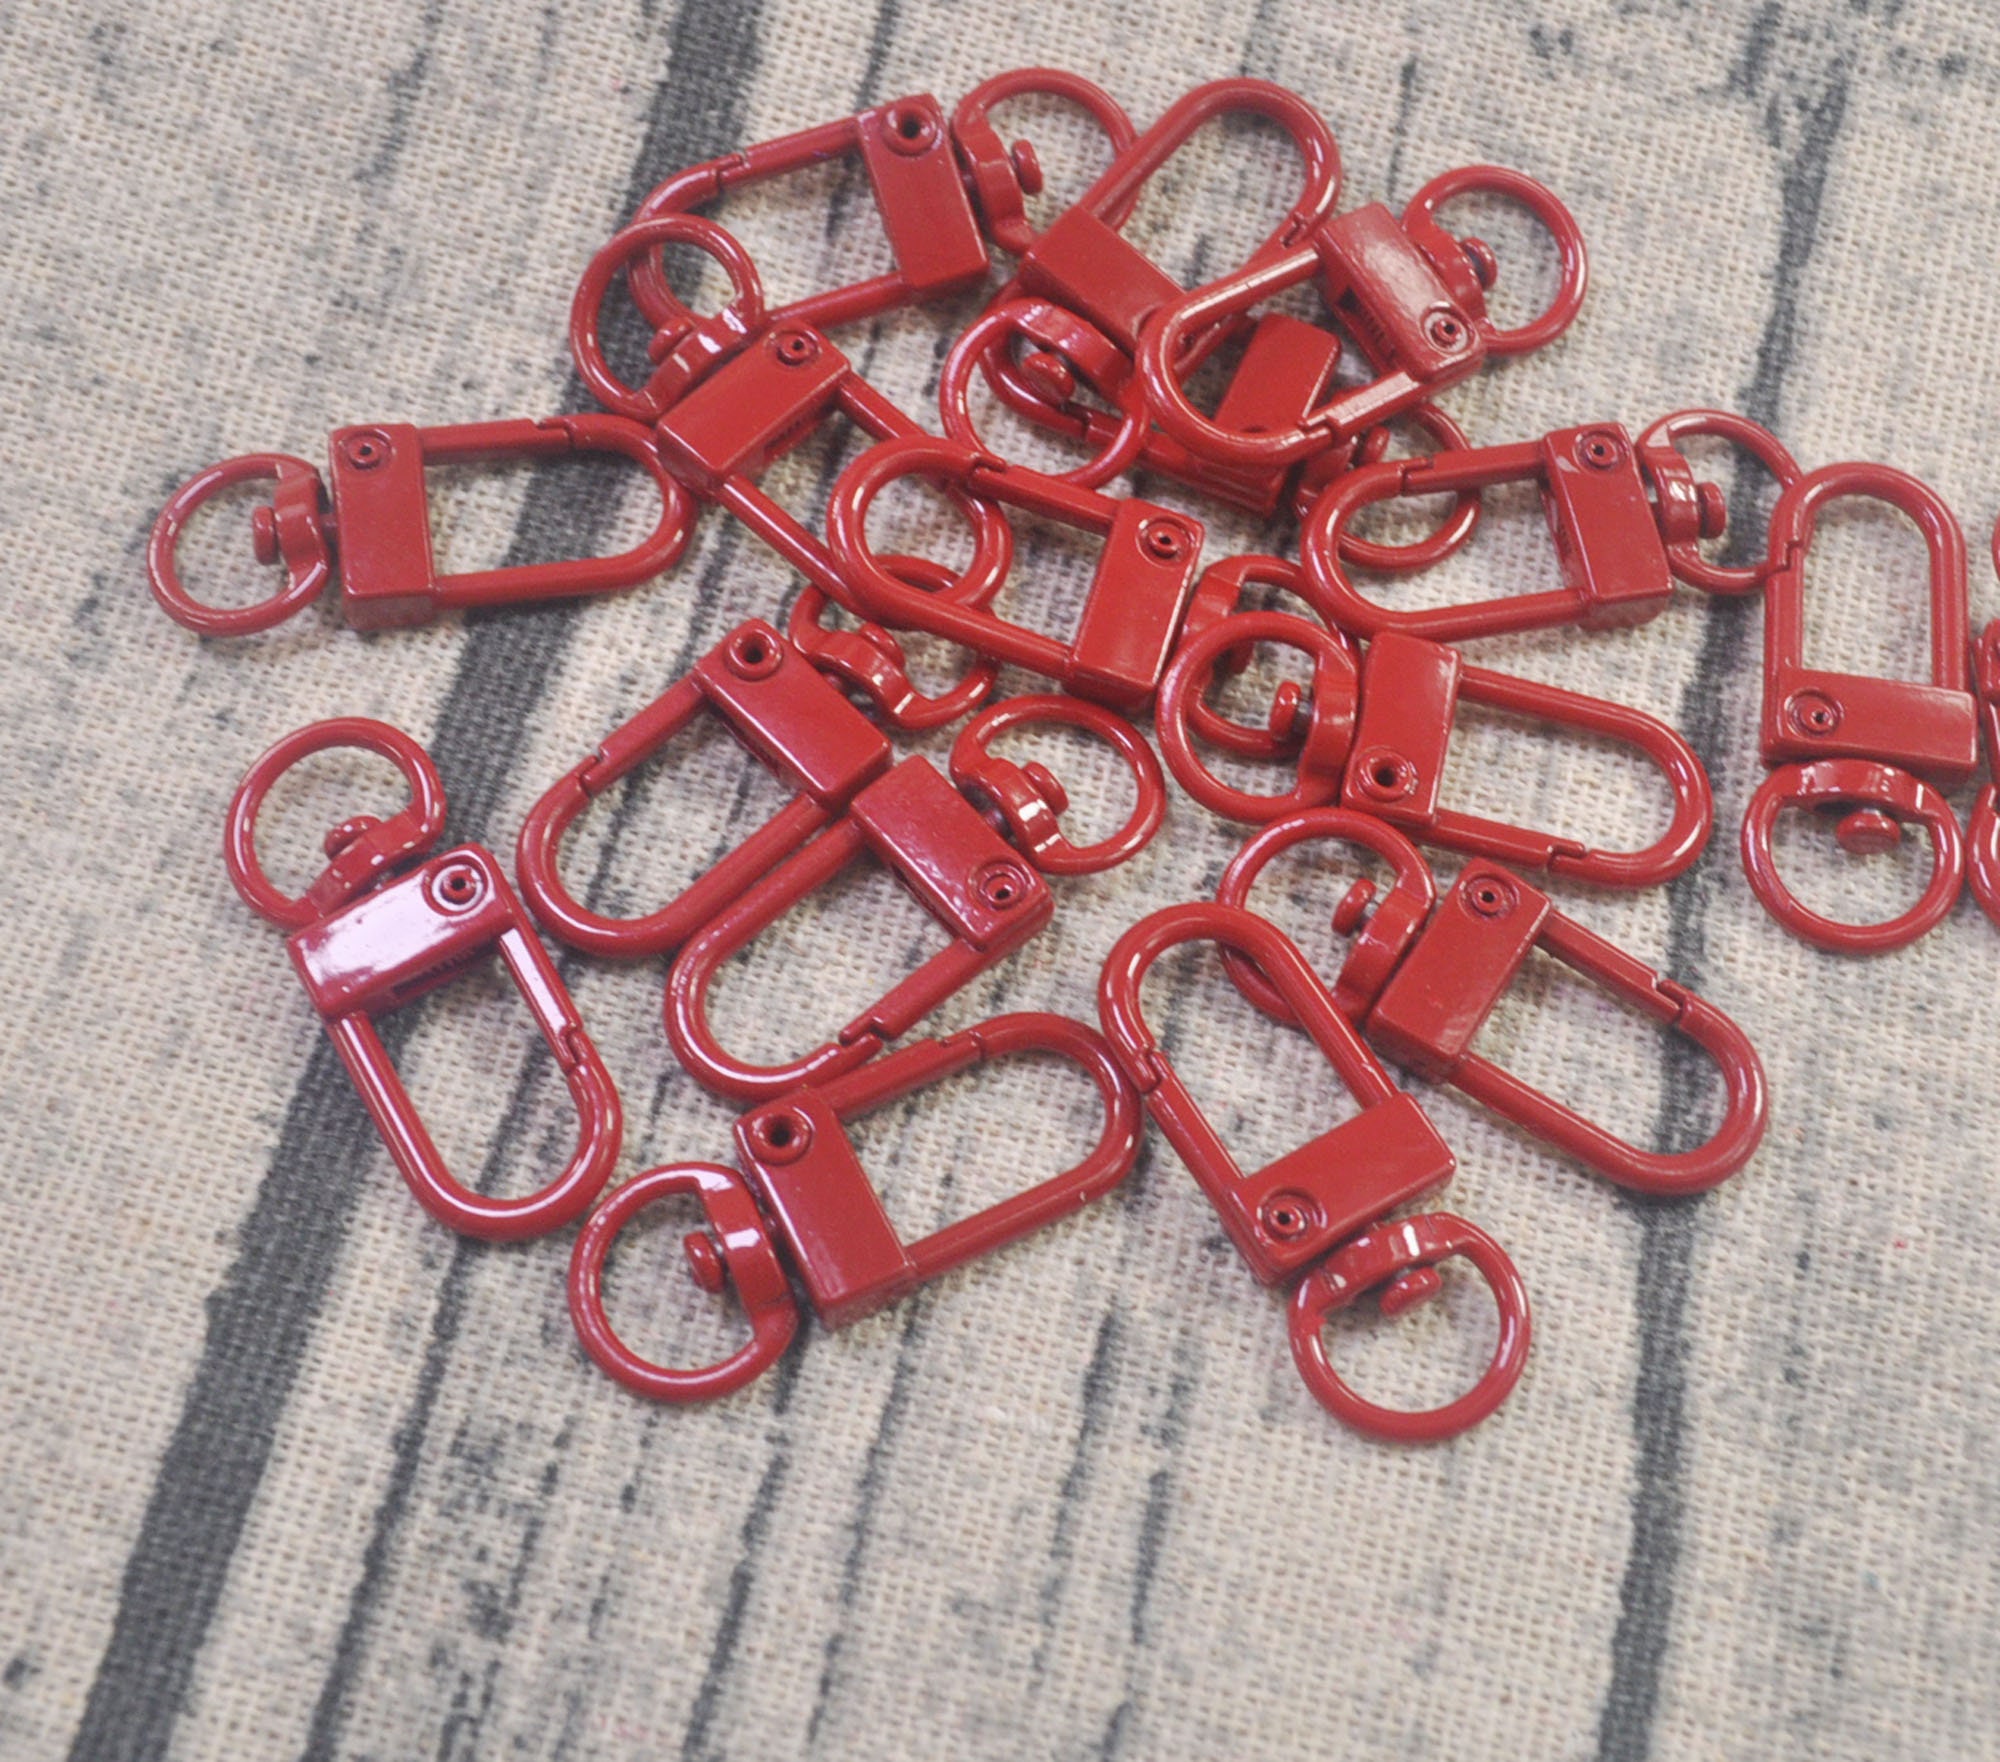  40PCS Metal Star Shape Claw Swivel Lobster Clasp,Snap Hook with  Key Rings,DIY Accessories for Bag,Keychains,Jewelry Making Silver and Golden